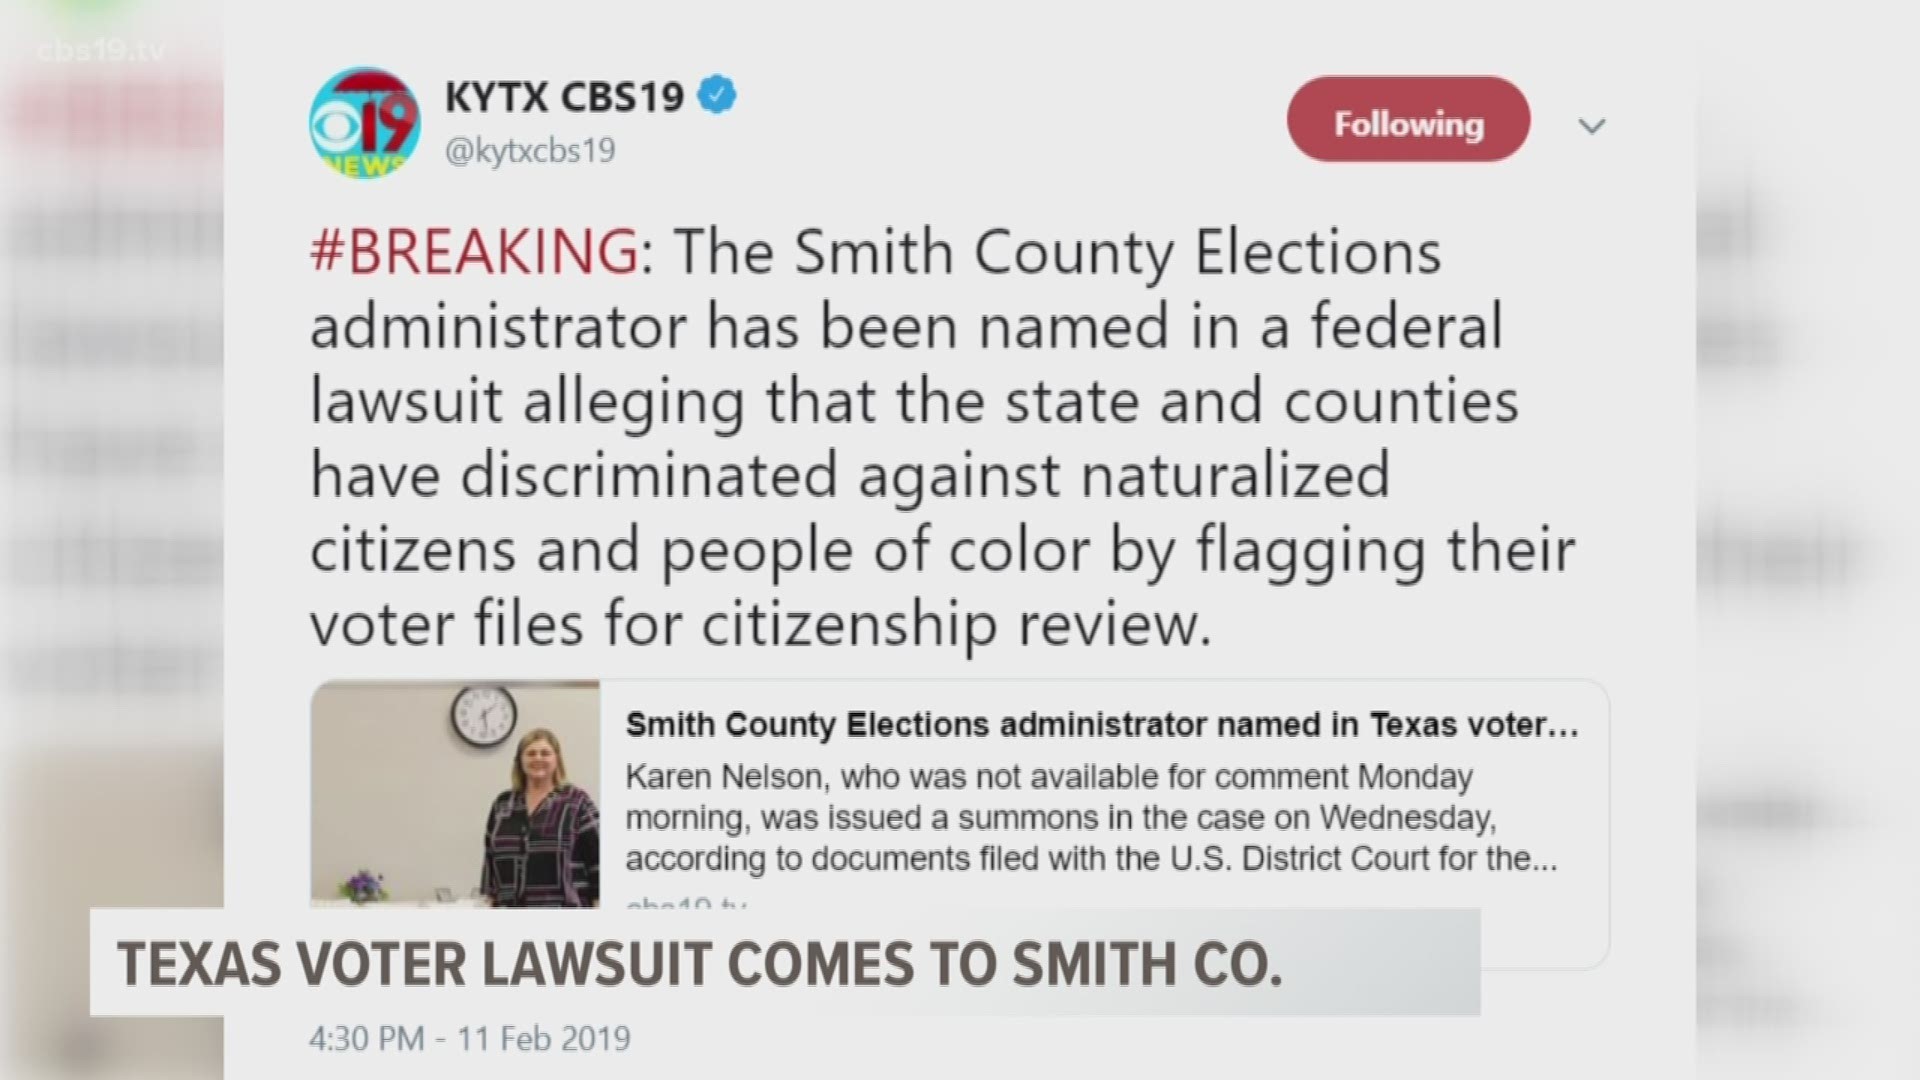 Smith County Elections administrator Karen Nelson has been named in a federal lawsuit alleging that the state and counties have discriminated against naturalized citizens and people of color by flagging their voter files for citizenship review.